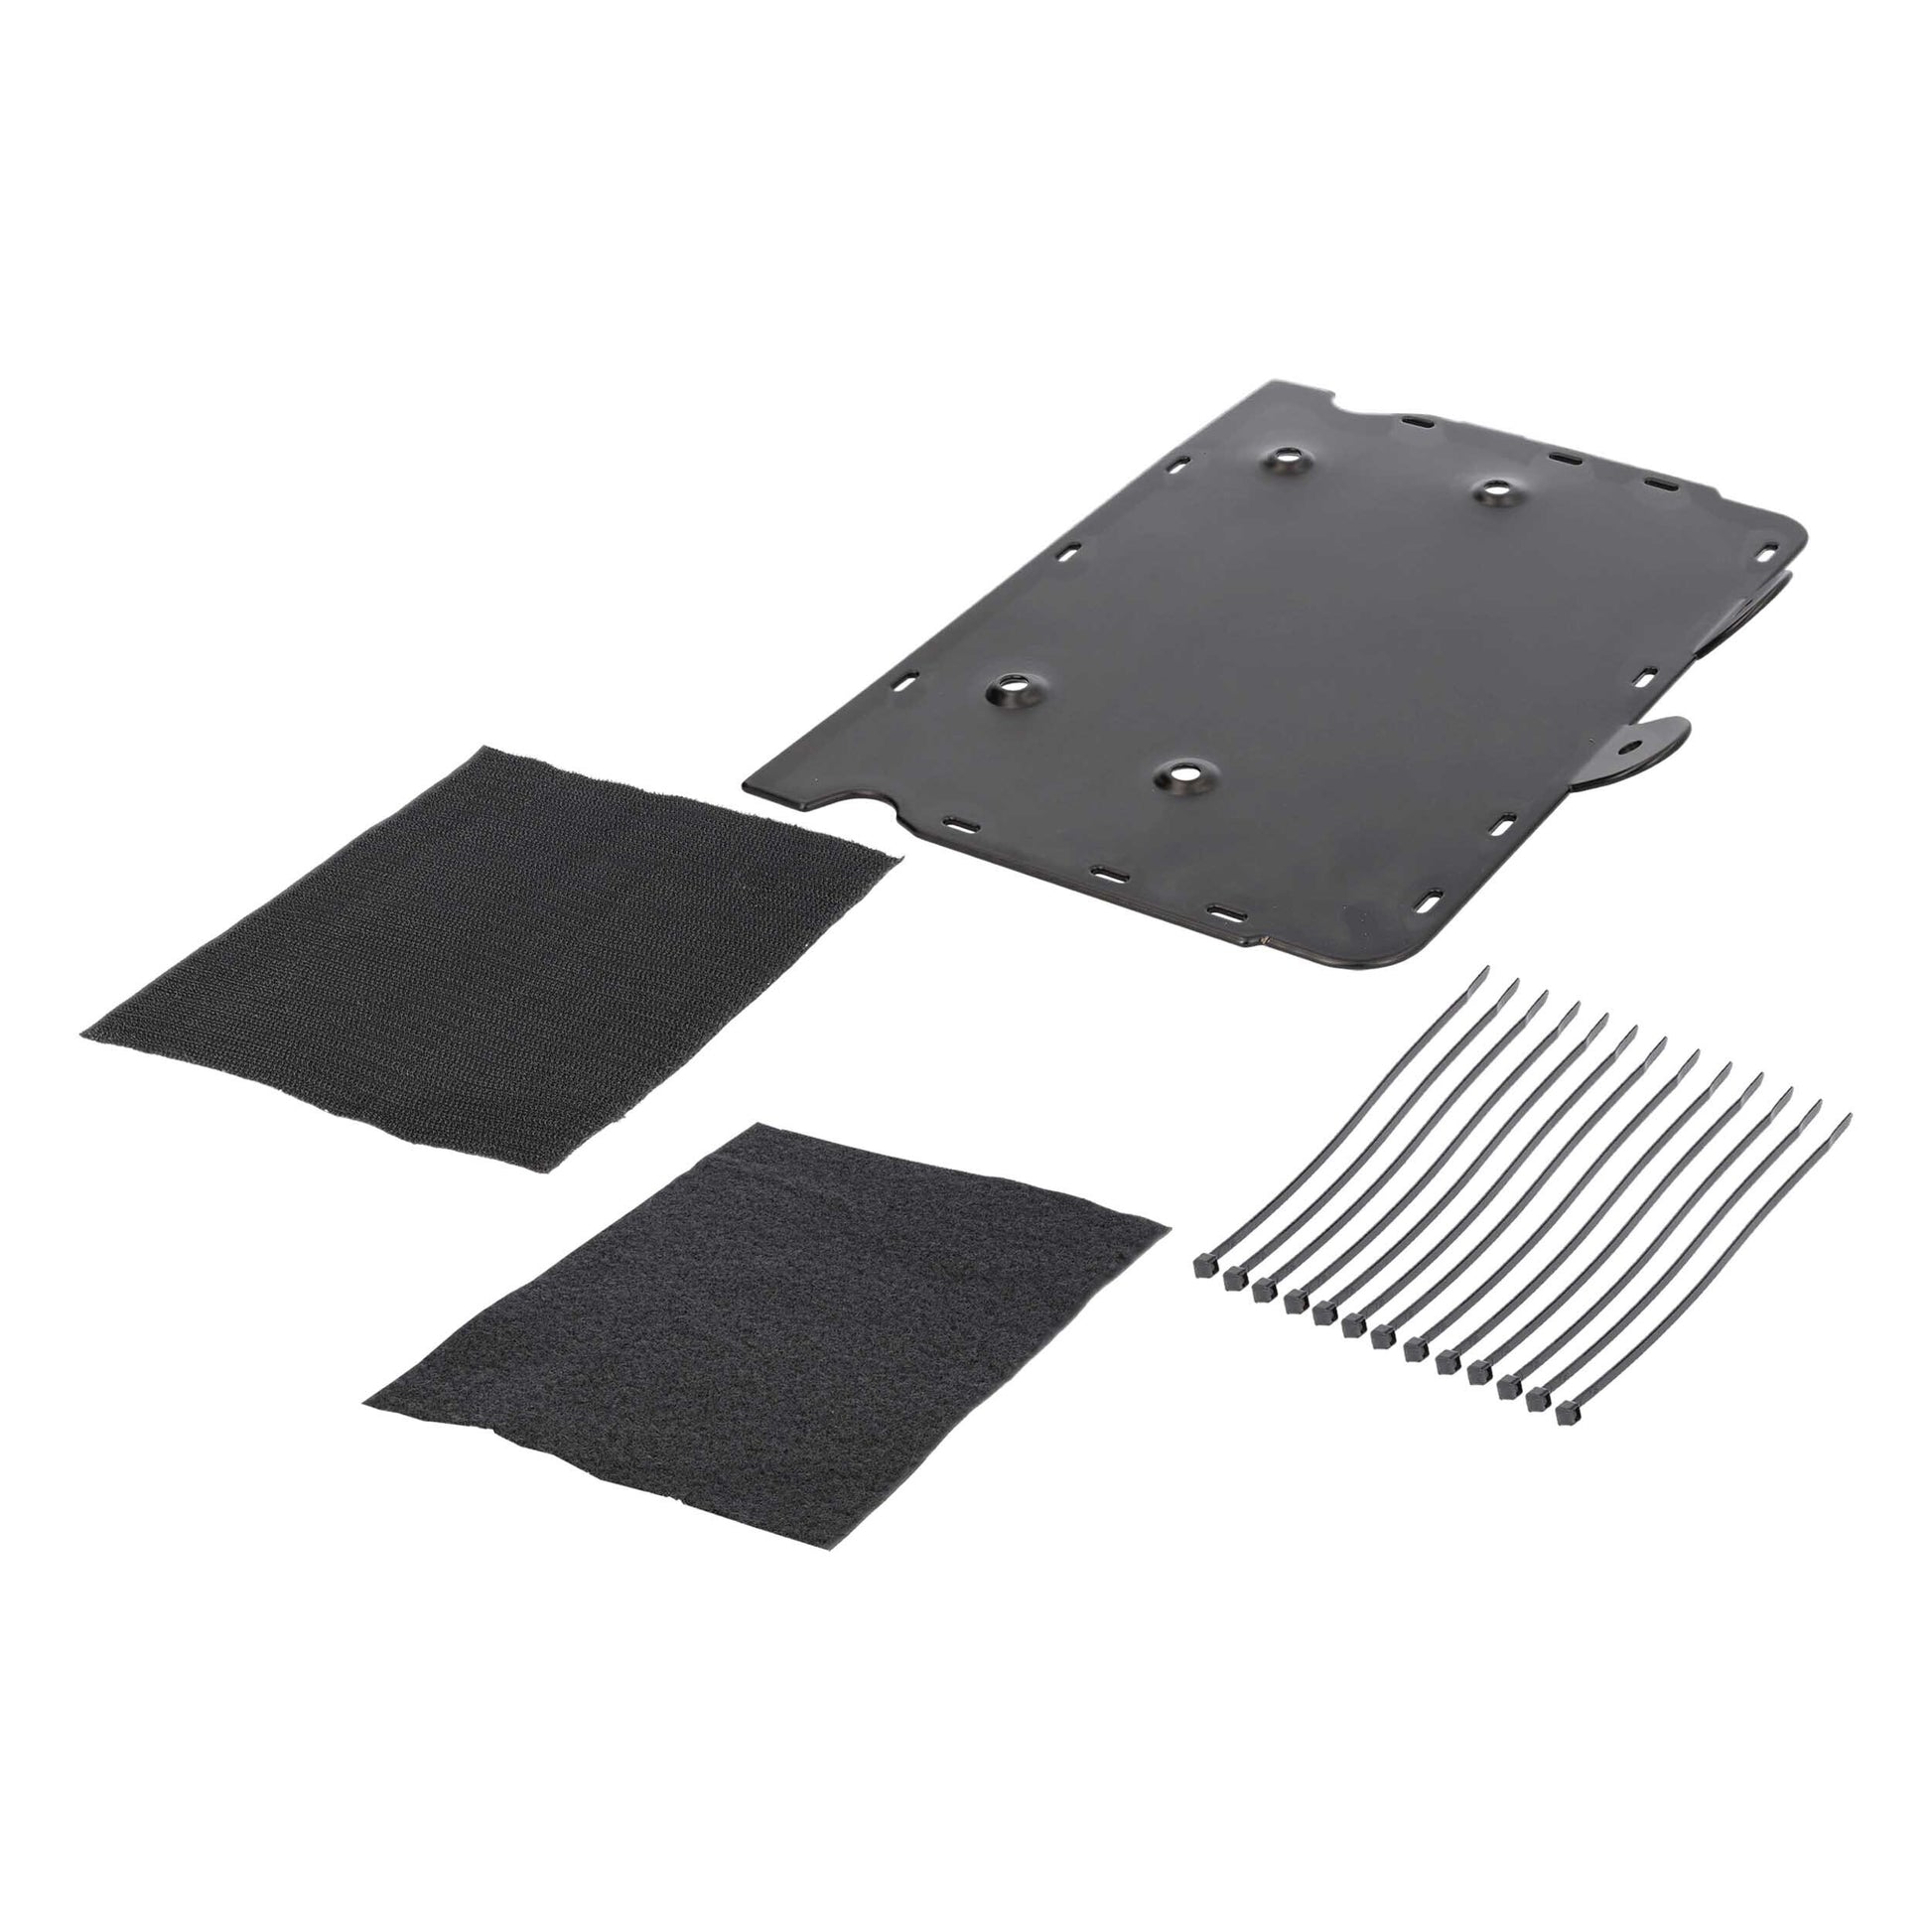 Saddle Tramp Amp Installation Products Saddle Tramp (BCAMP06)FLH UNIVERSAL AMP MOUNTING PLATE 2014-UP (Batwing)